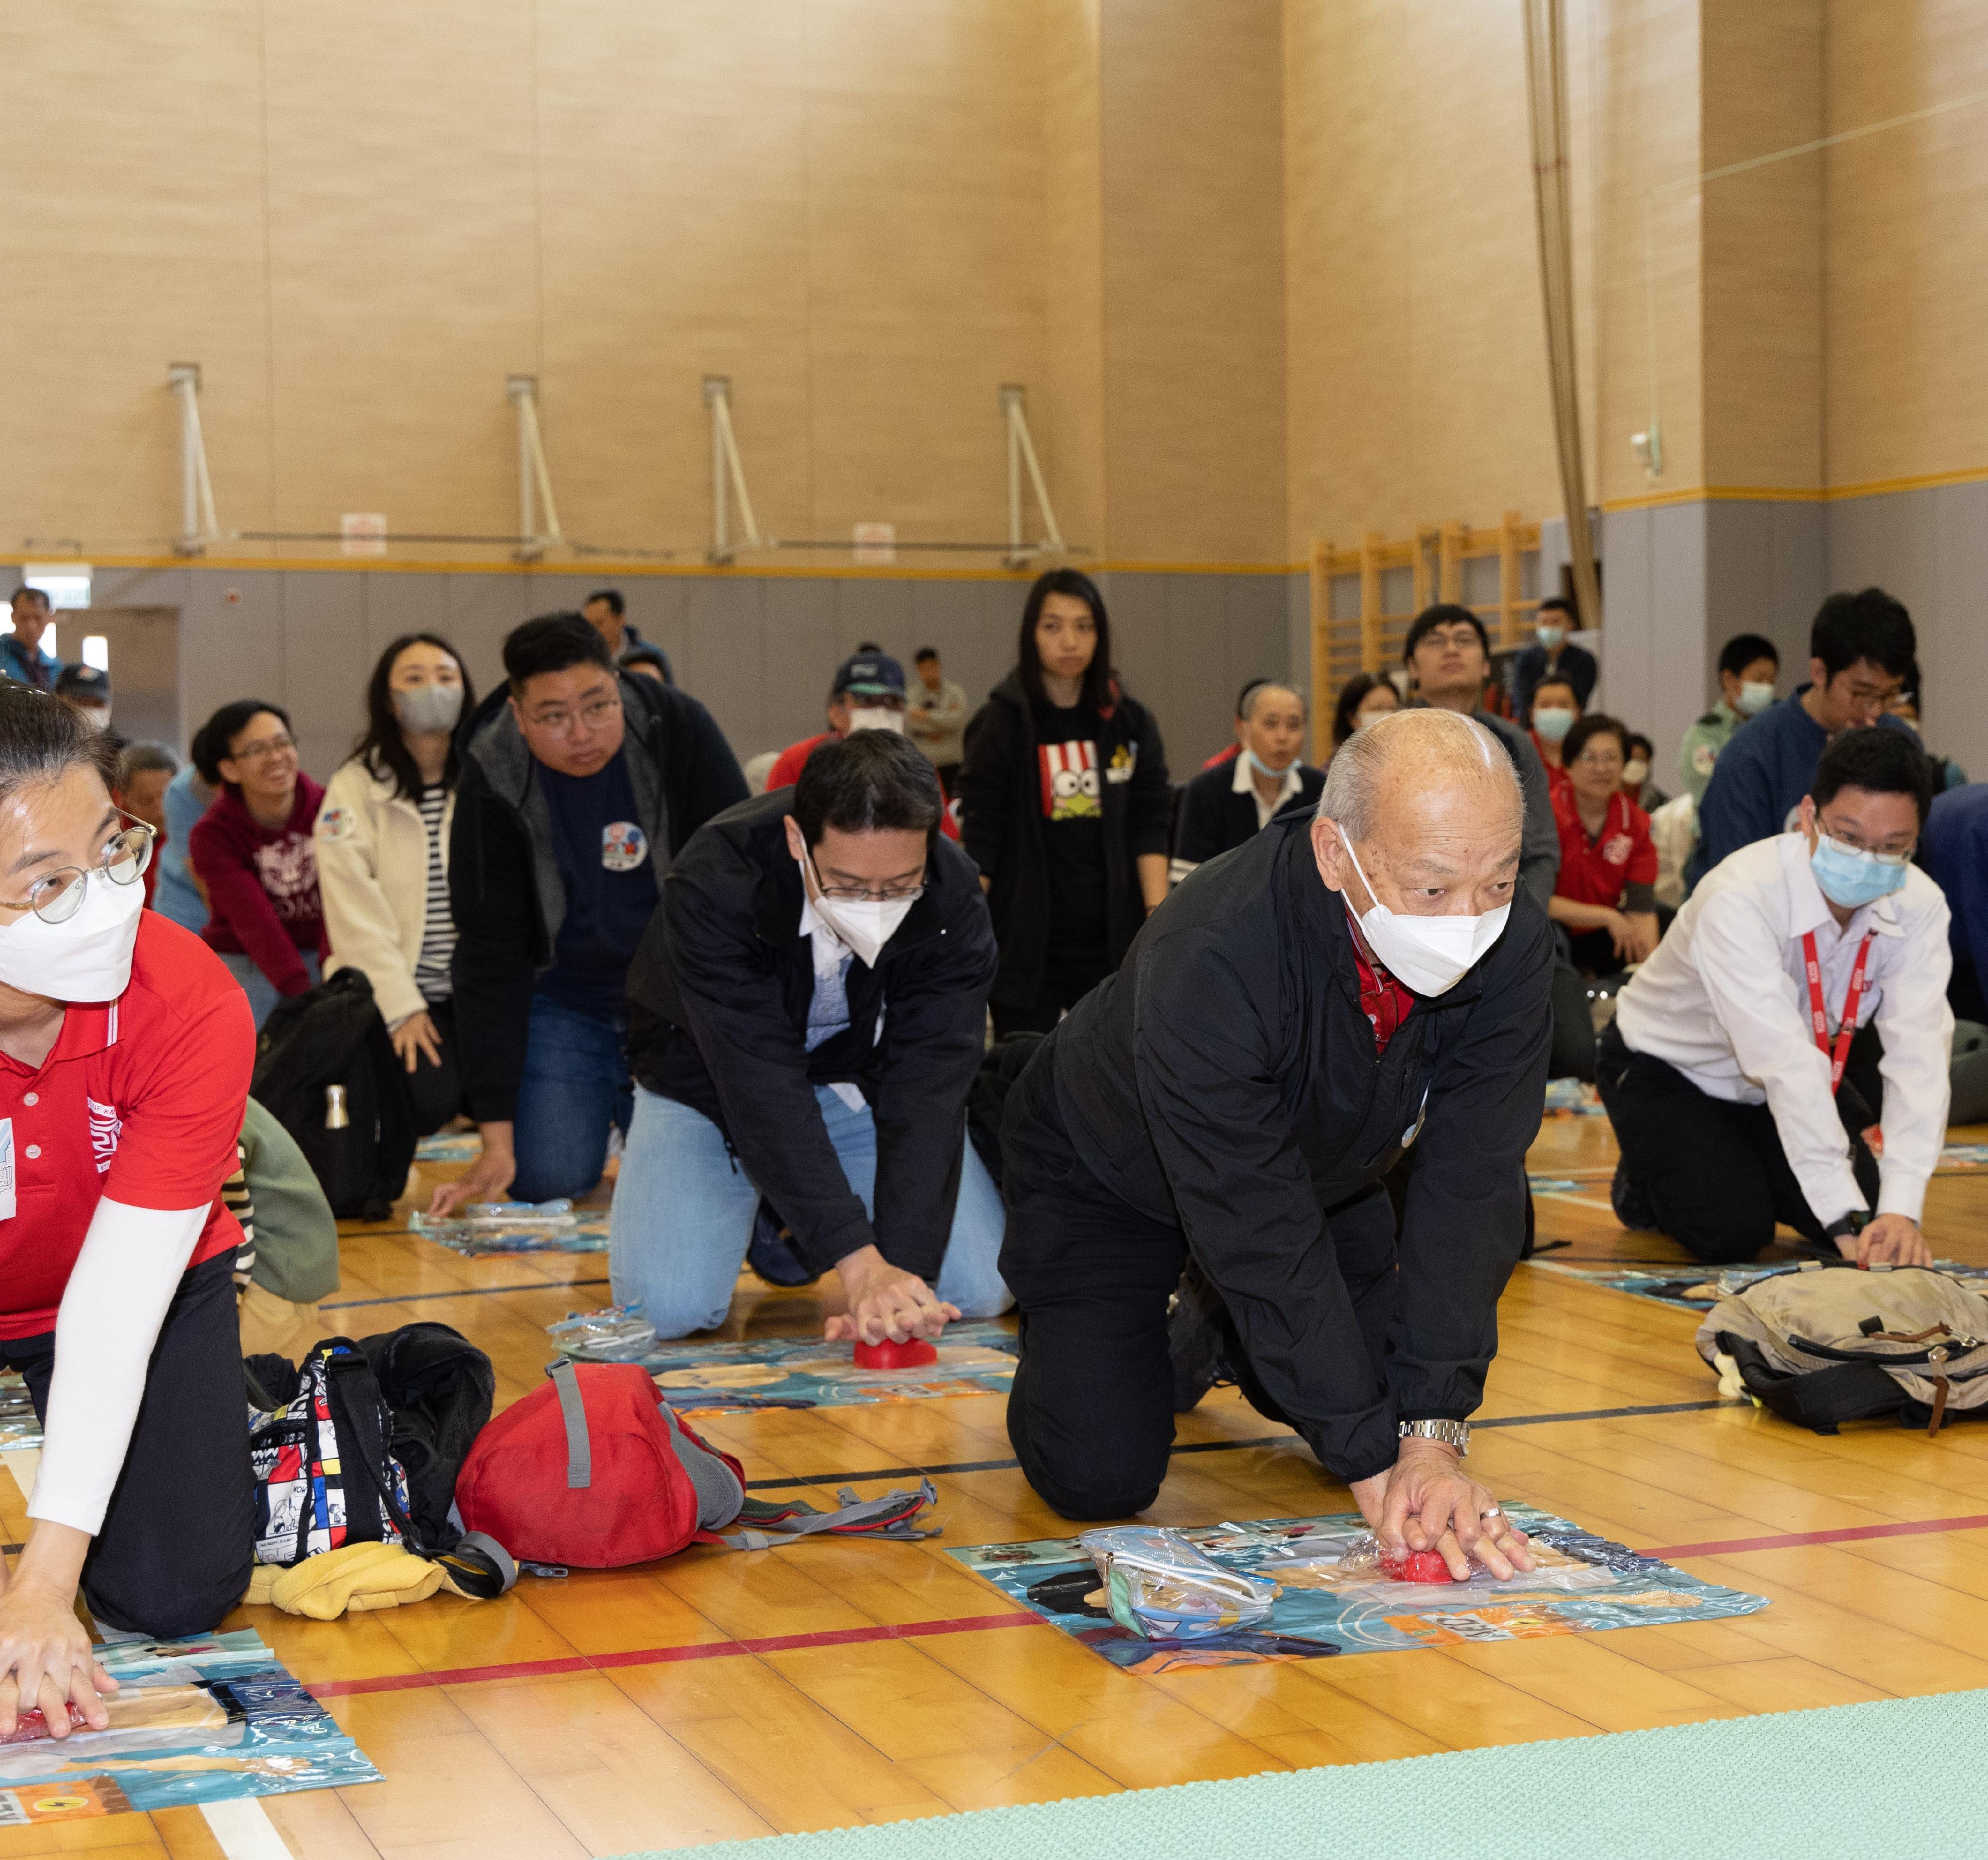 The Fire Services Department today (February 24) organised the AED Everywhere - Bus Companies United to Save Hearts event at the Fire and Ambulance Services Academy in Tseung Kwan O, appealing to all sectors of the community to install more automated external defibrillators (AED). Photo shows participants attending a workshop on cardiopulmonary resuscitation and the use of AED, becoming a member of the Resuscitation Alliance.